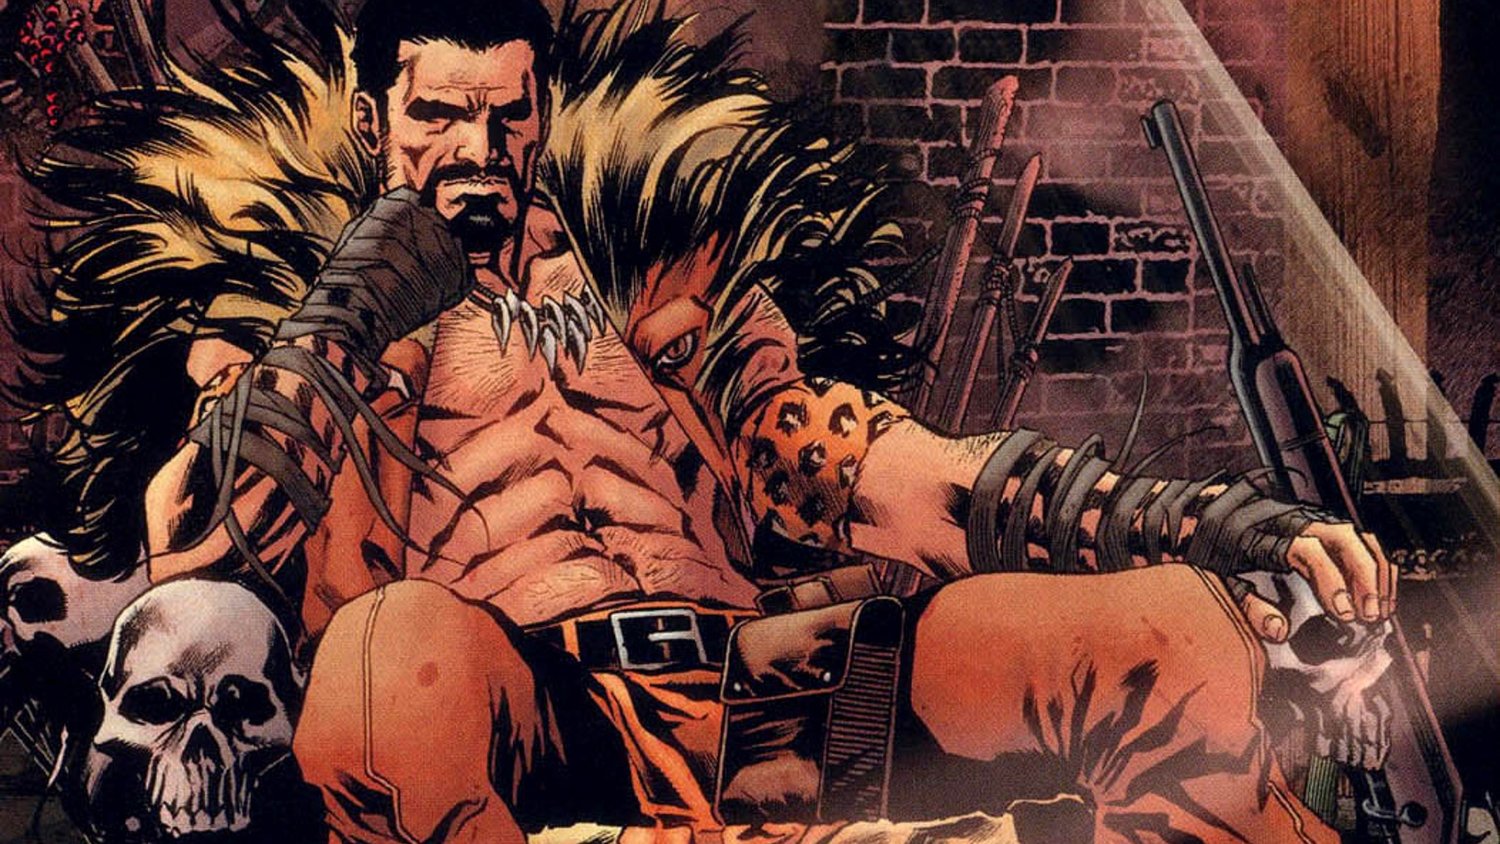 Ryan Coogler Wanted Kraven The Hunter To Appear in BLACK PANTHER.